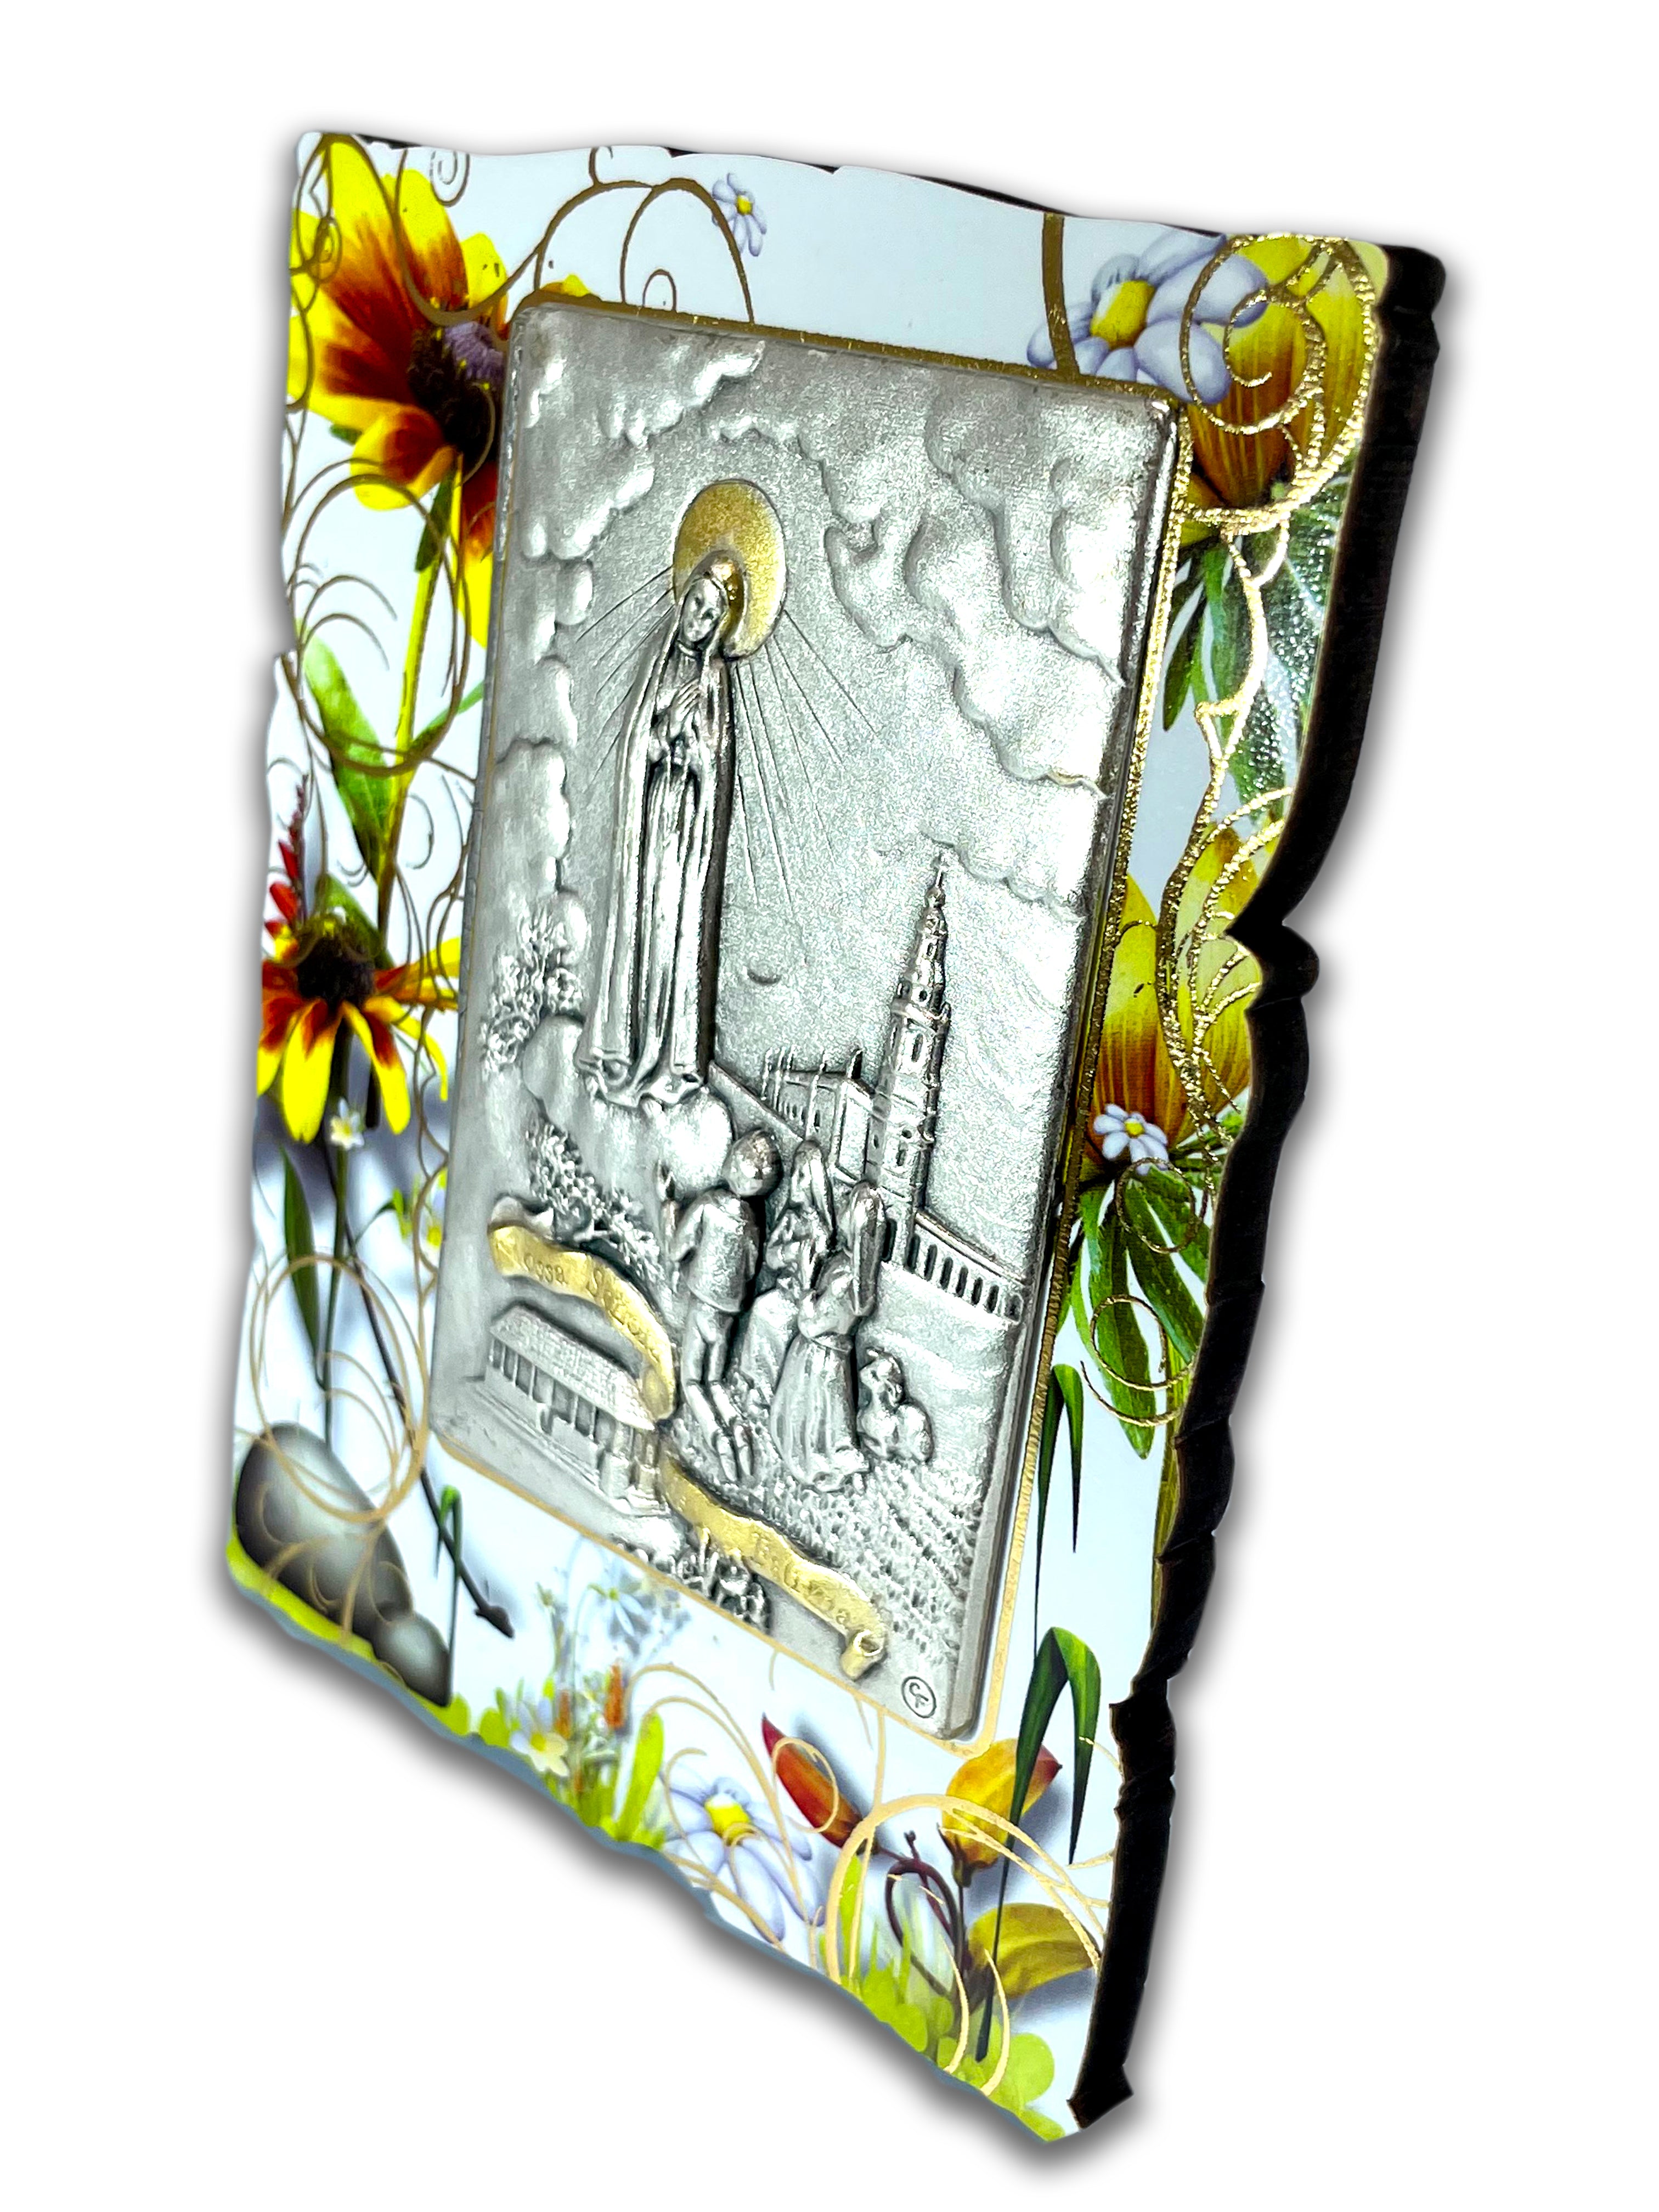 Frame Image on Relief of Our Lady of Fatima